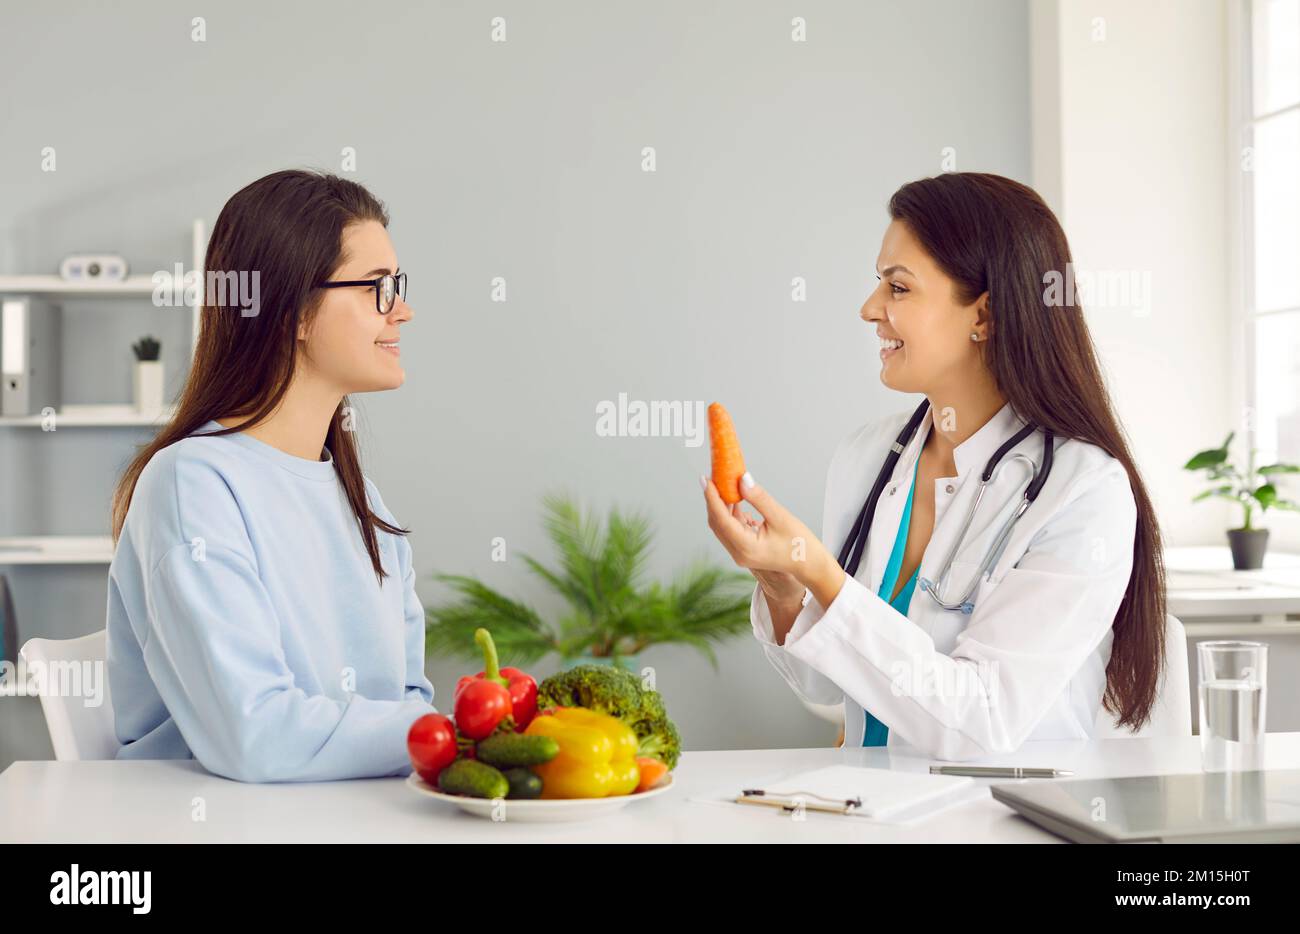 Young Caucasian woman sits at table with vegetables near doctor nutritionist in white coat Stock Photo